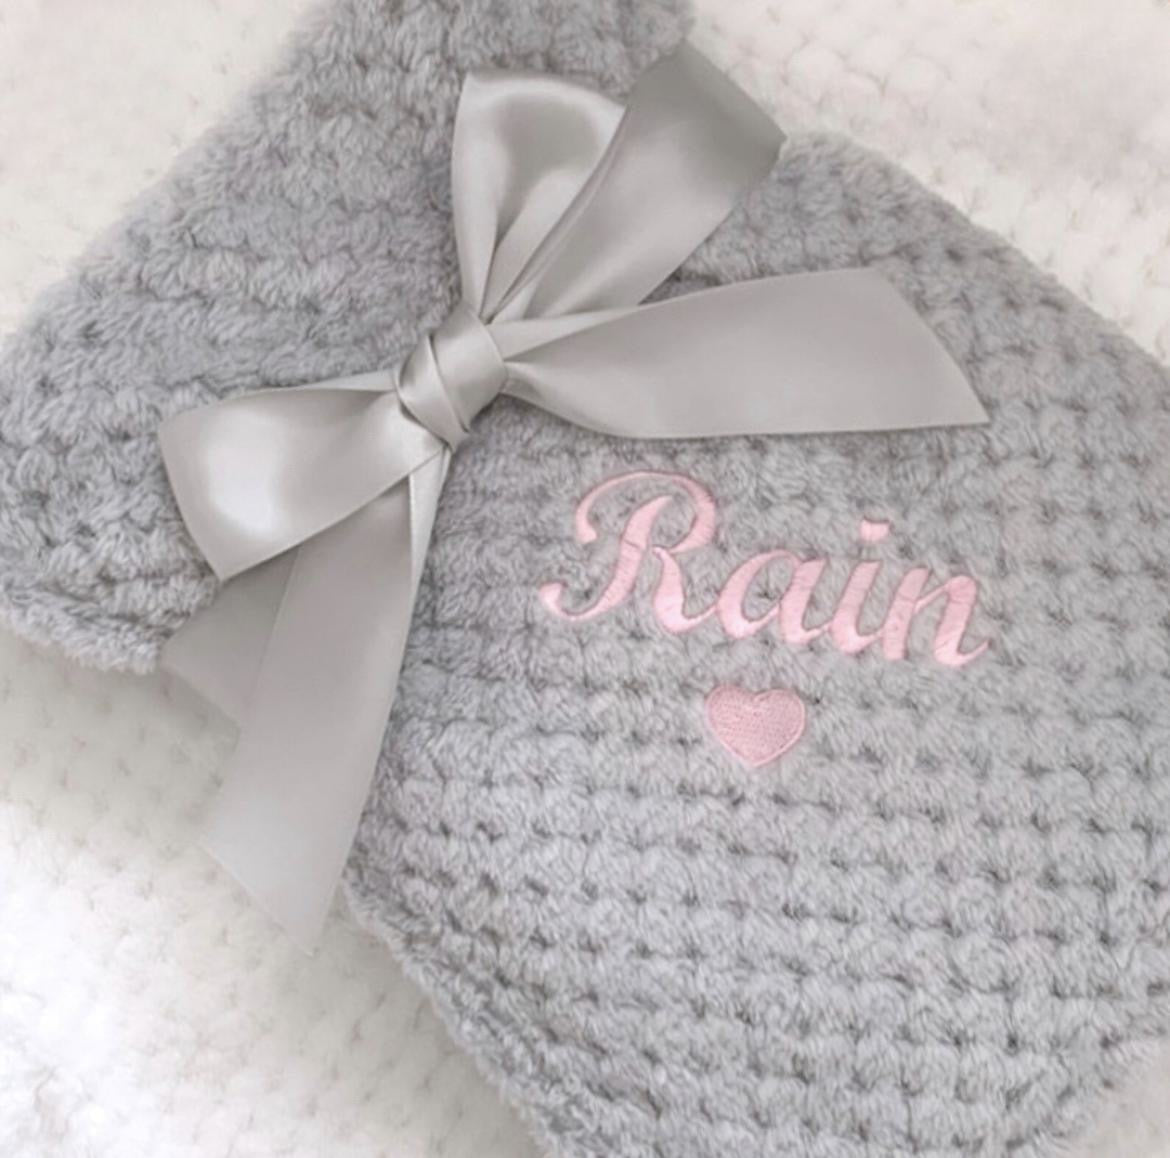 Super Soft Embroidered Personalised Baby Blanket.